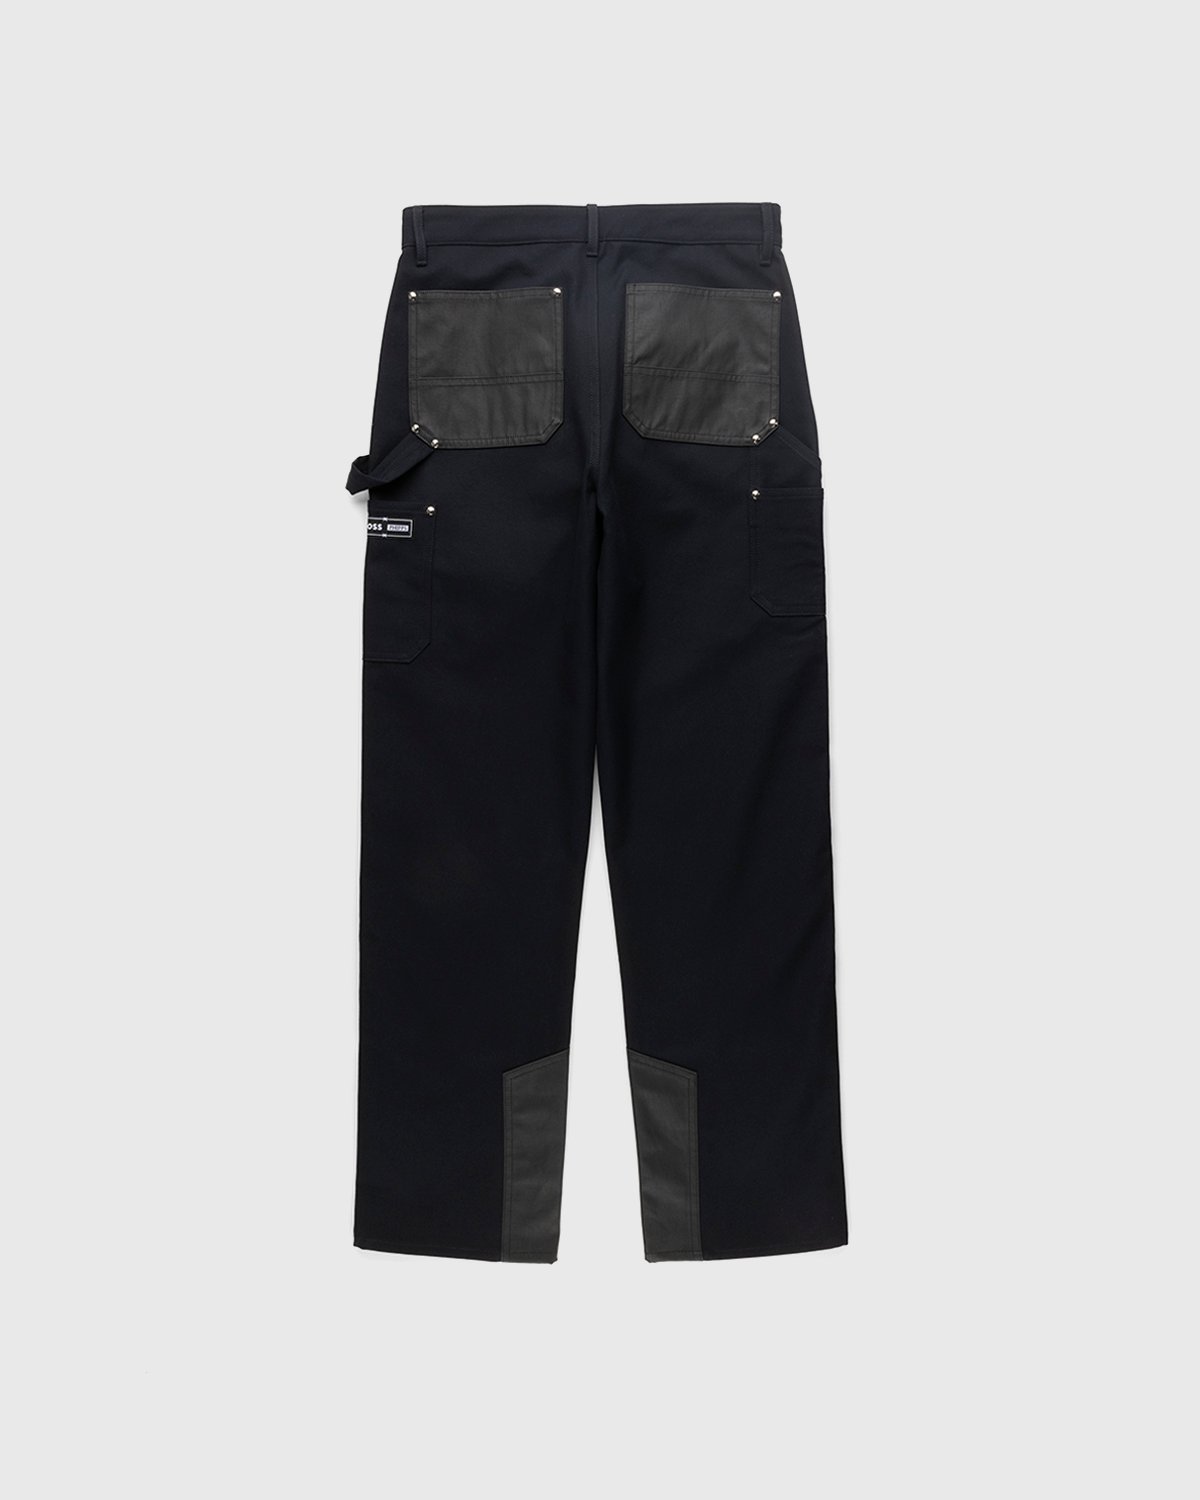 BOSS x Phipps - Water-Repellent Trousers Black - Clothing - Black - Image 2